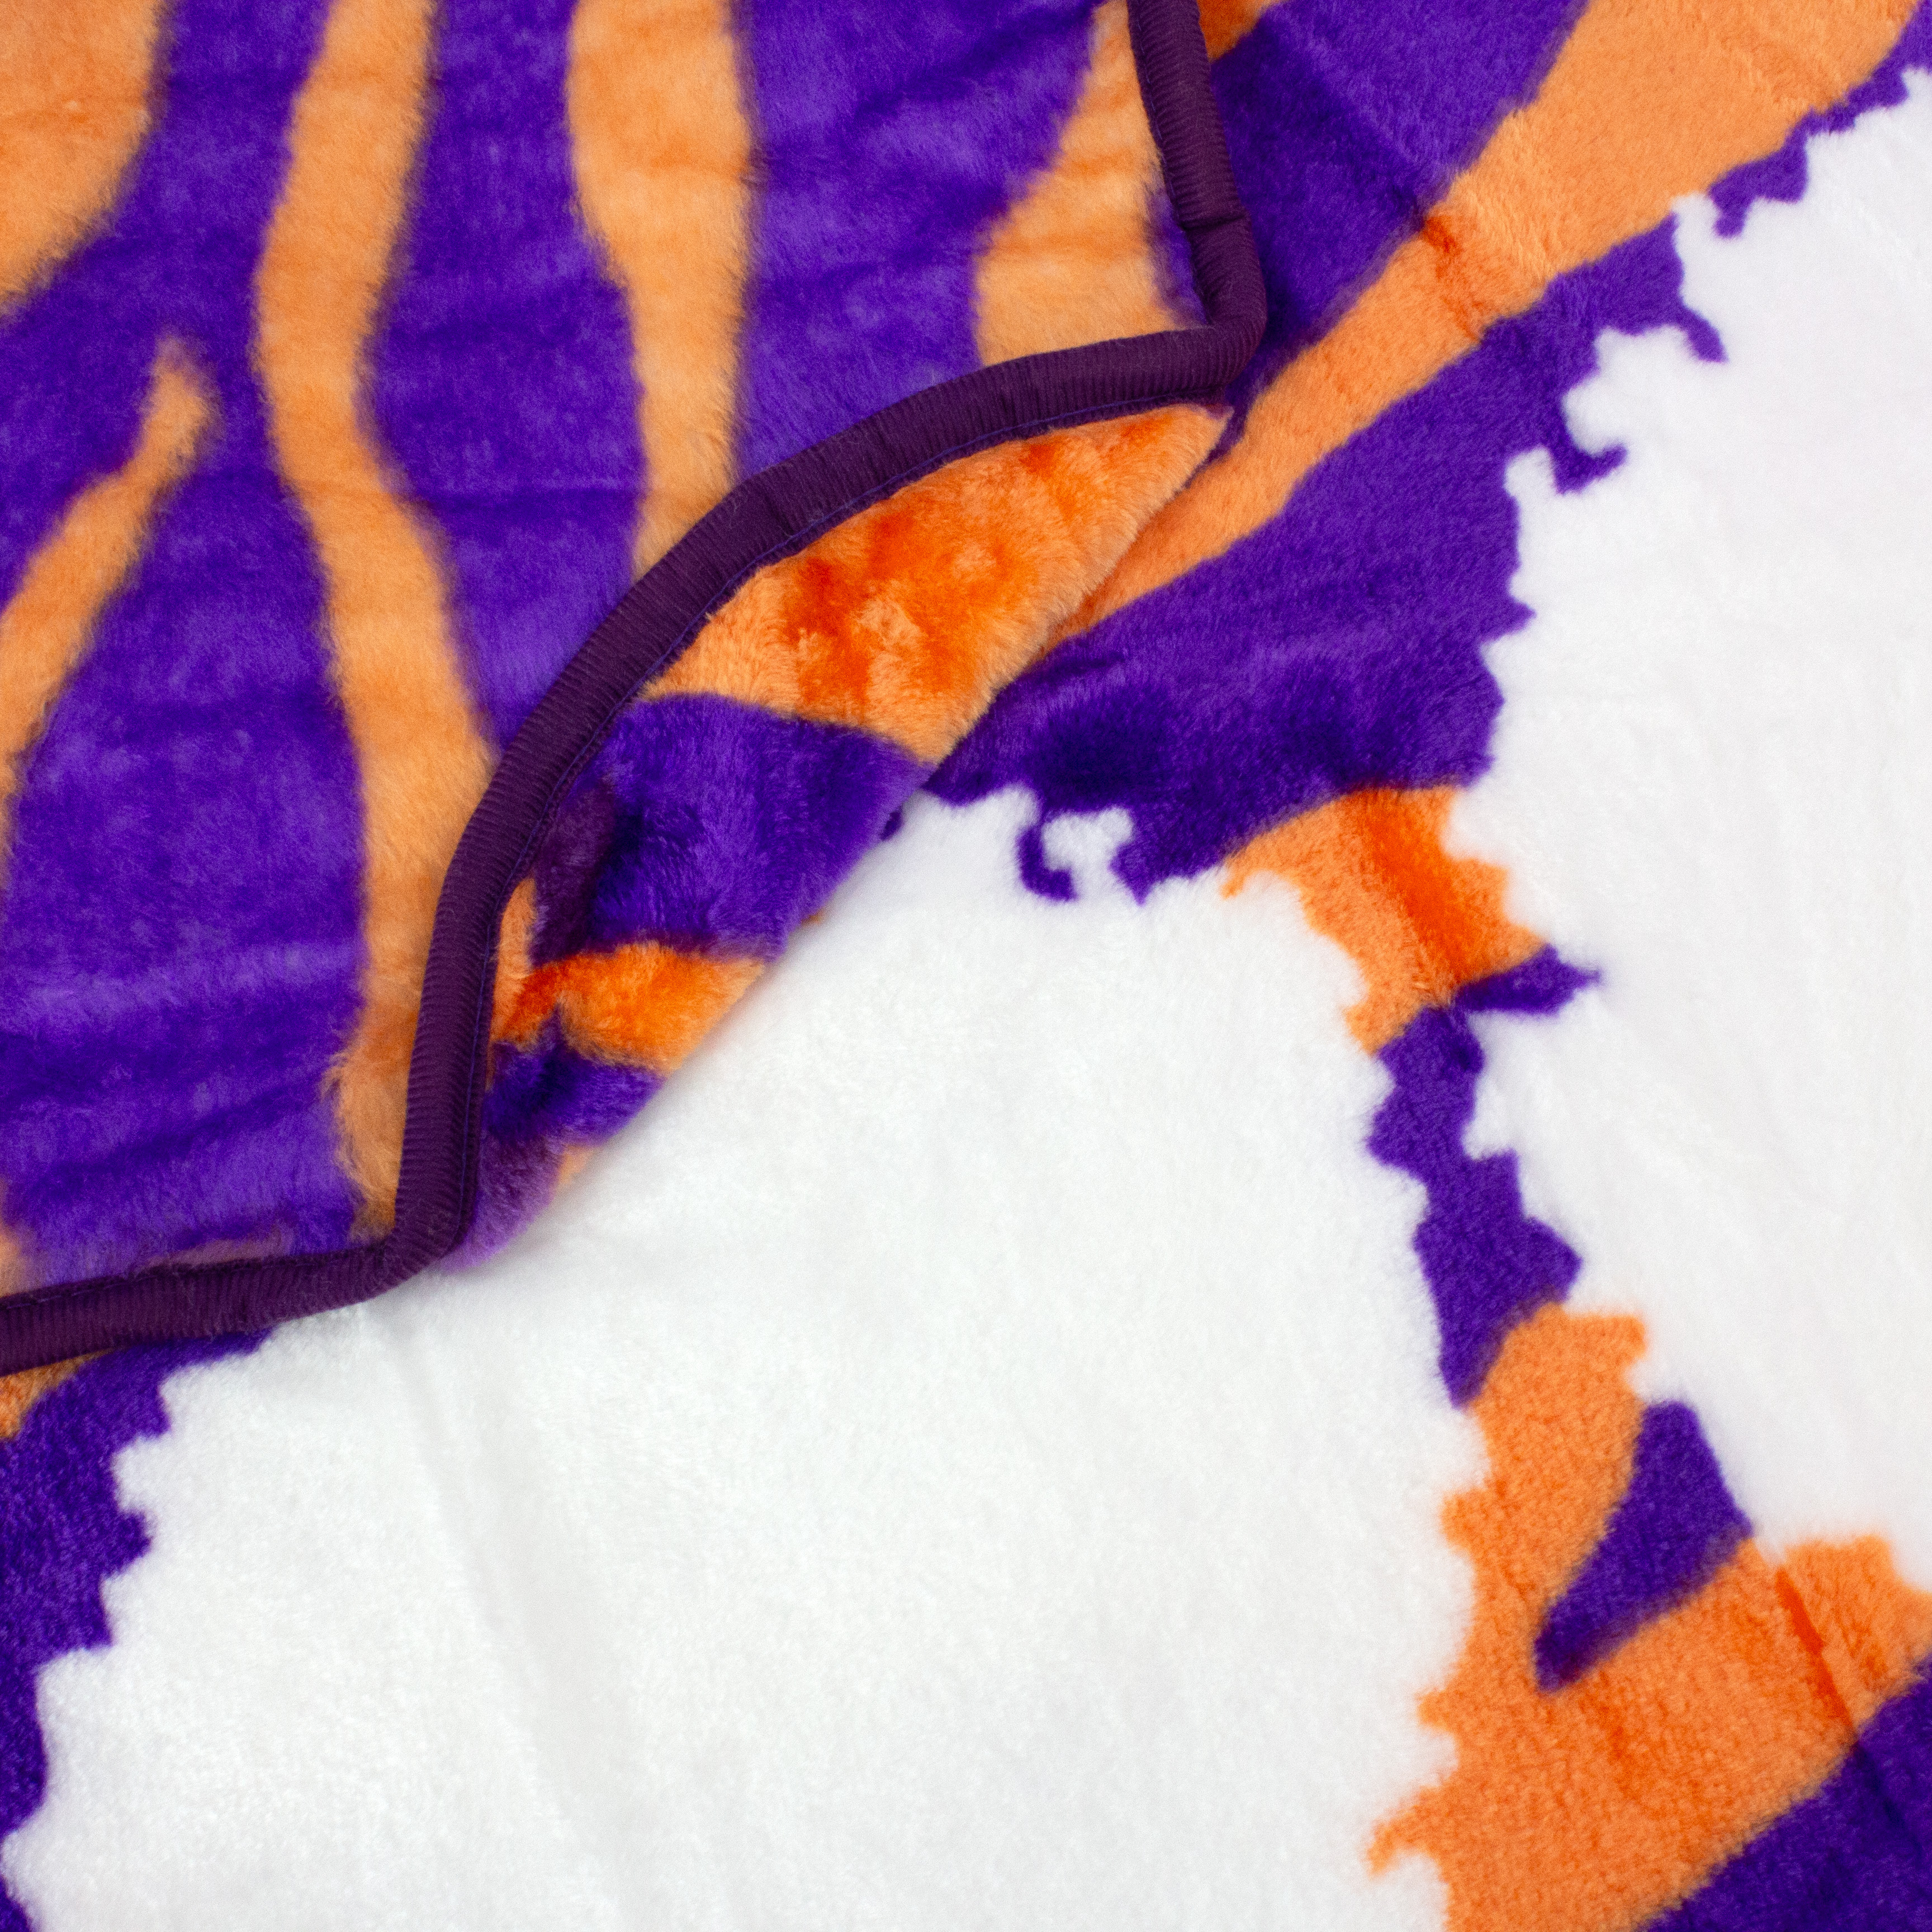 College Covers Everything Comfy Clemson Tigers Soft Raschel Throw Blanket, 60" x 50" - image 5 of 8